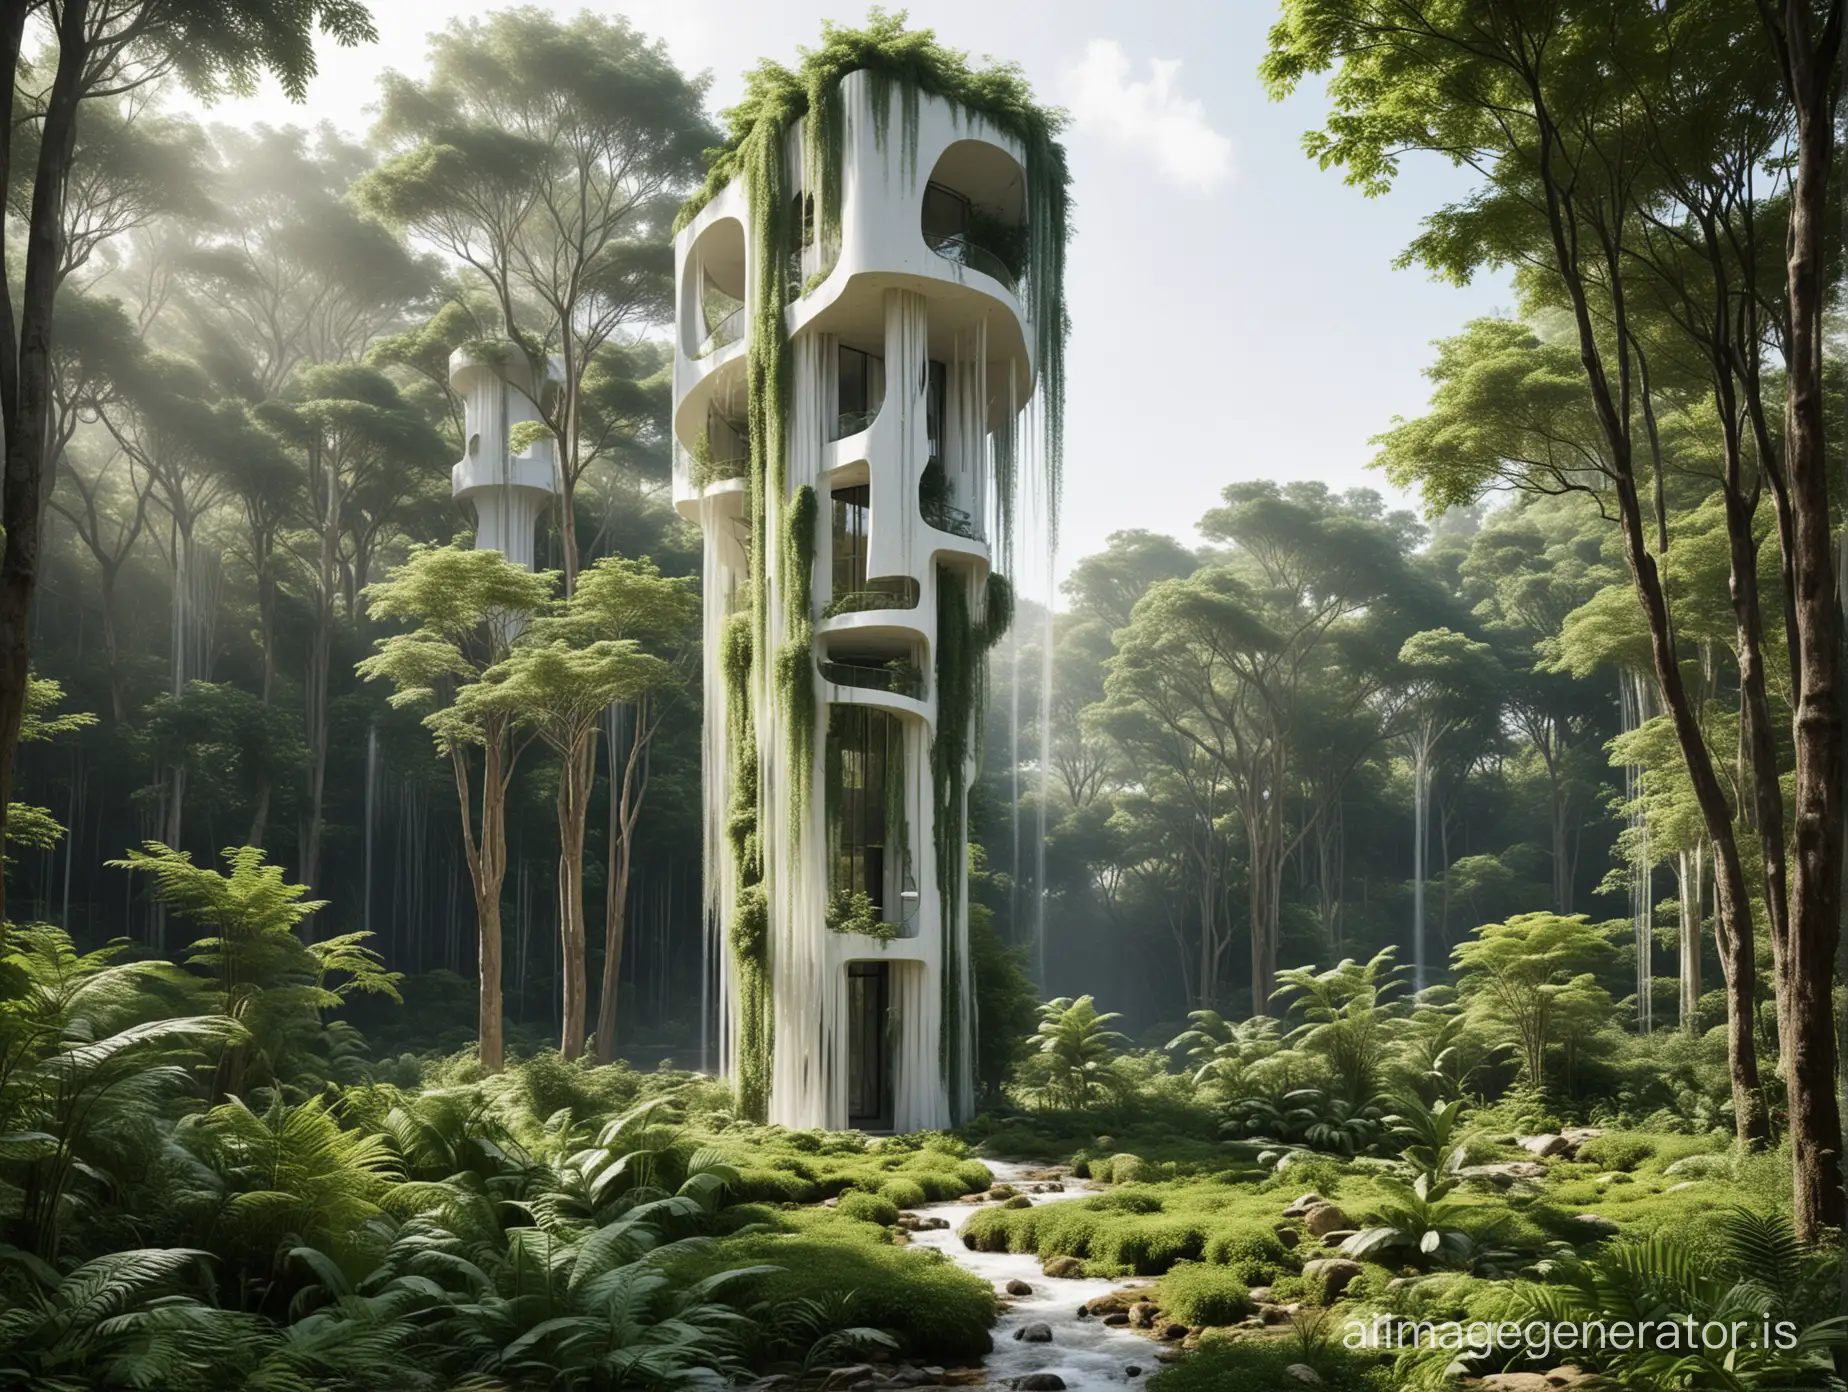 An ecological tower in the shape of a canopy. The tower is located in an ecological park and a waterfall. The tower is slim and white in color, the vegetation forms another building next to it.